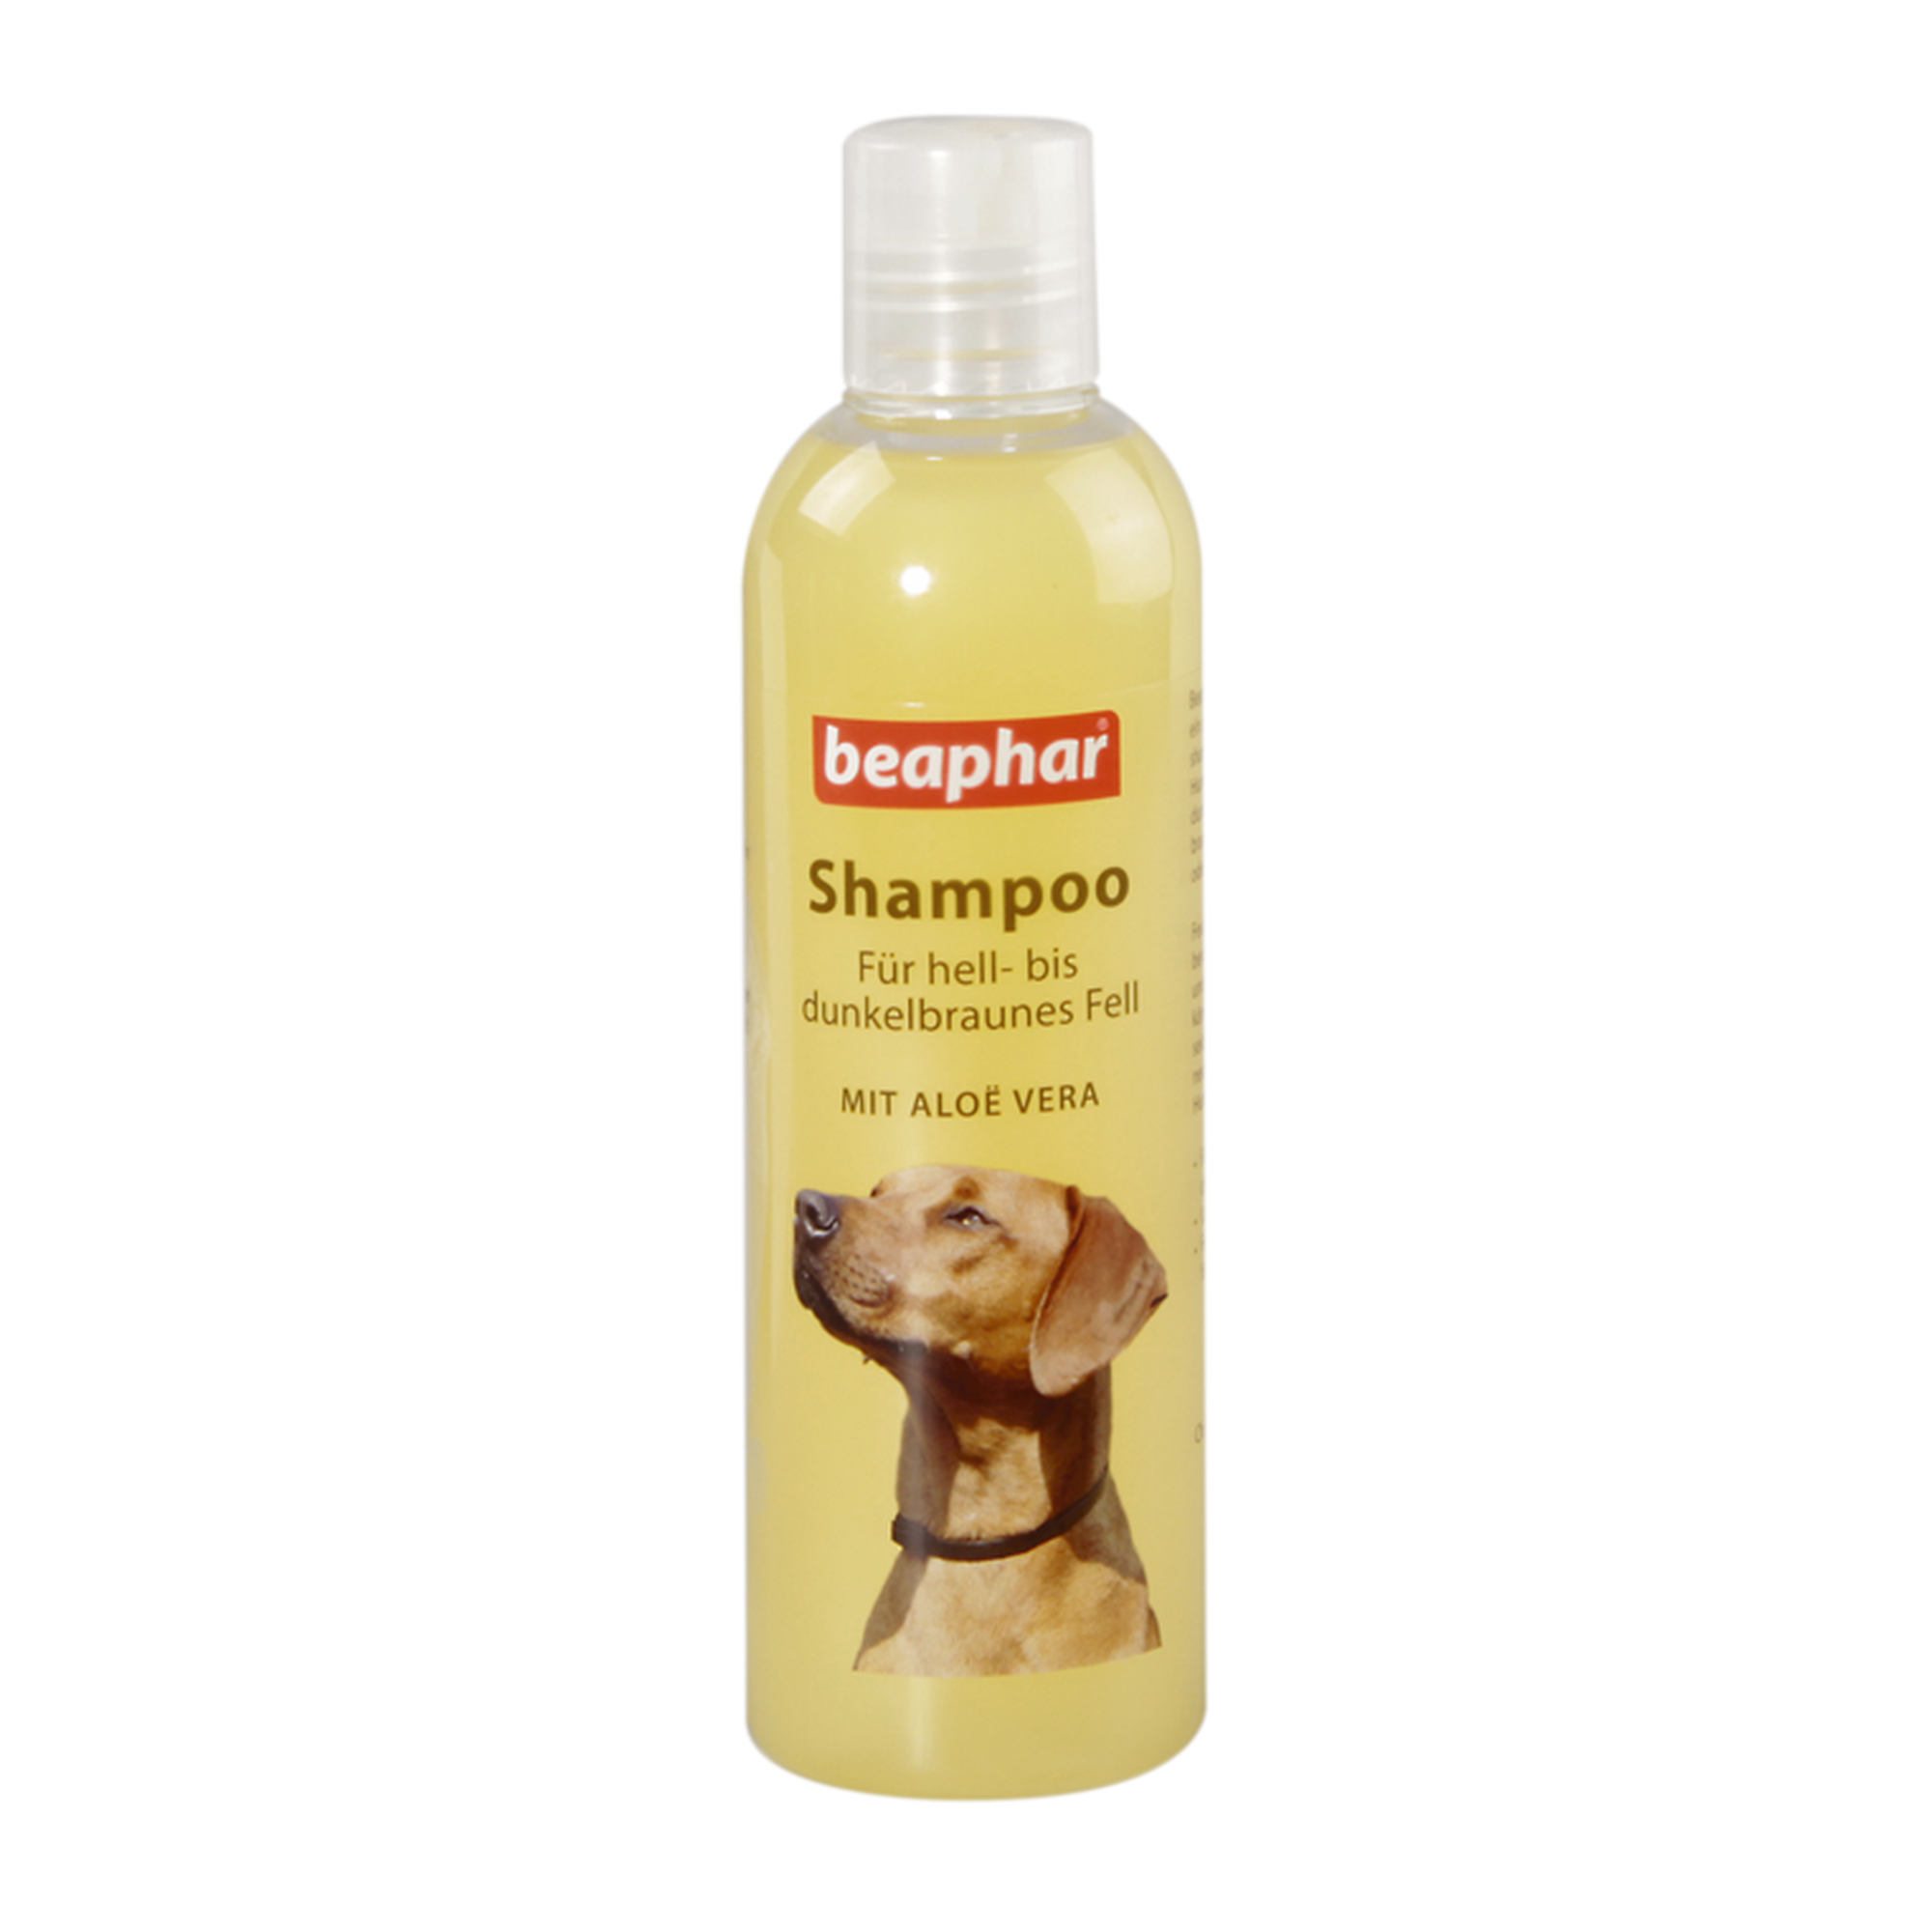 Hunde-Shampoo für braunes Fell 250 ml + product picture